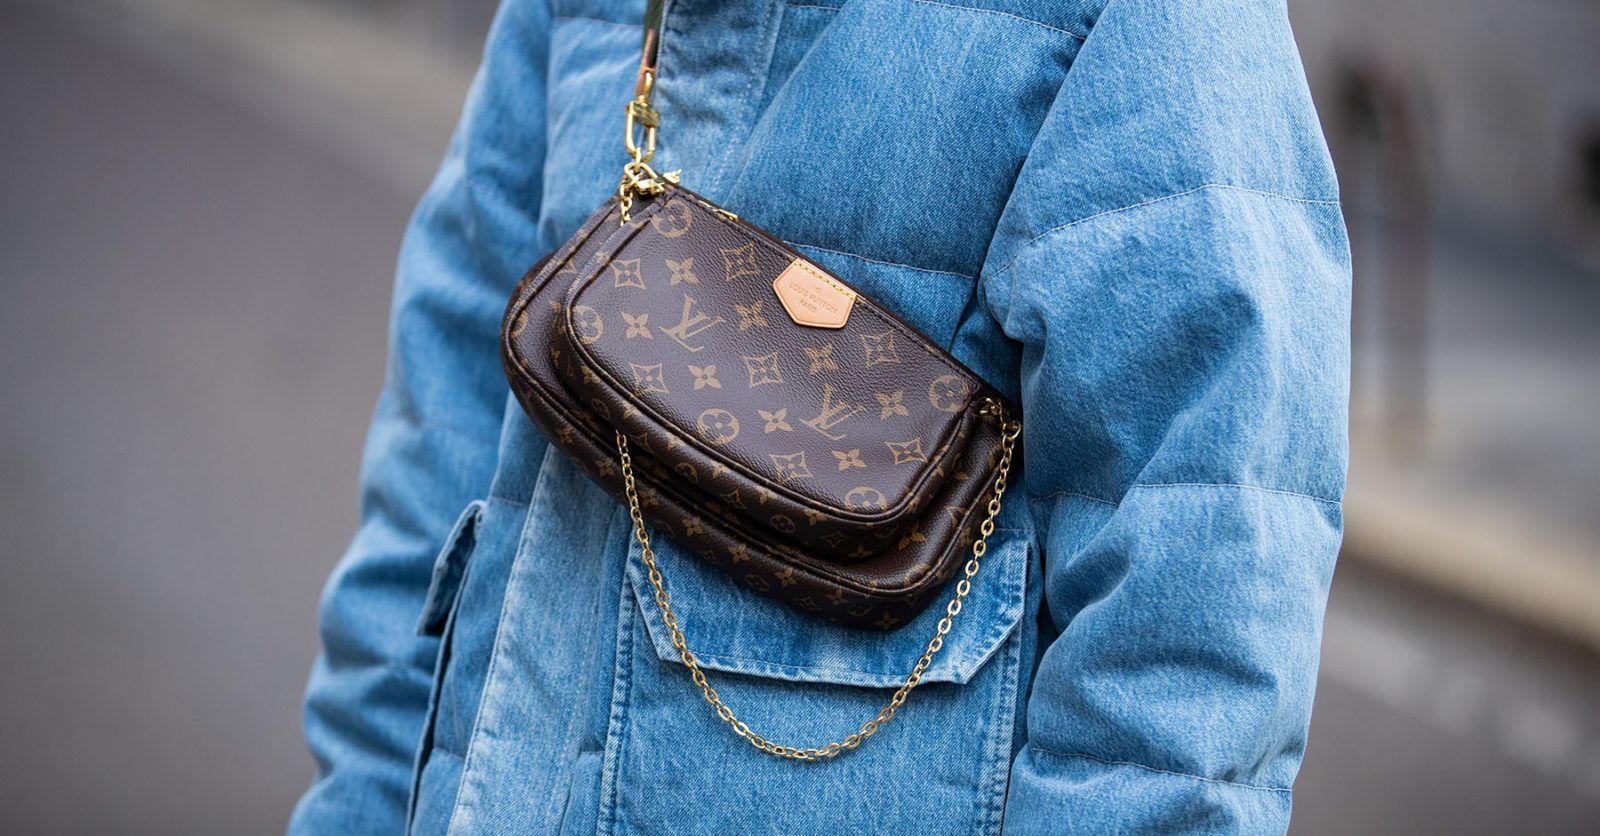 Louis Vuitton, Prada and Cartier are getting into blockchain tech — here’s why it’s a good thing